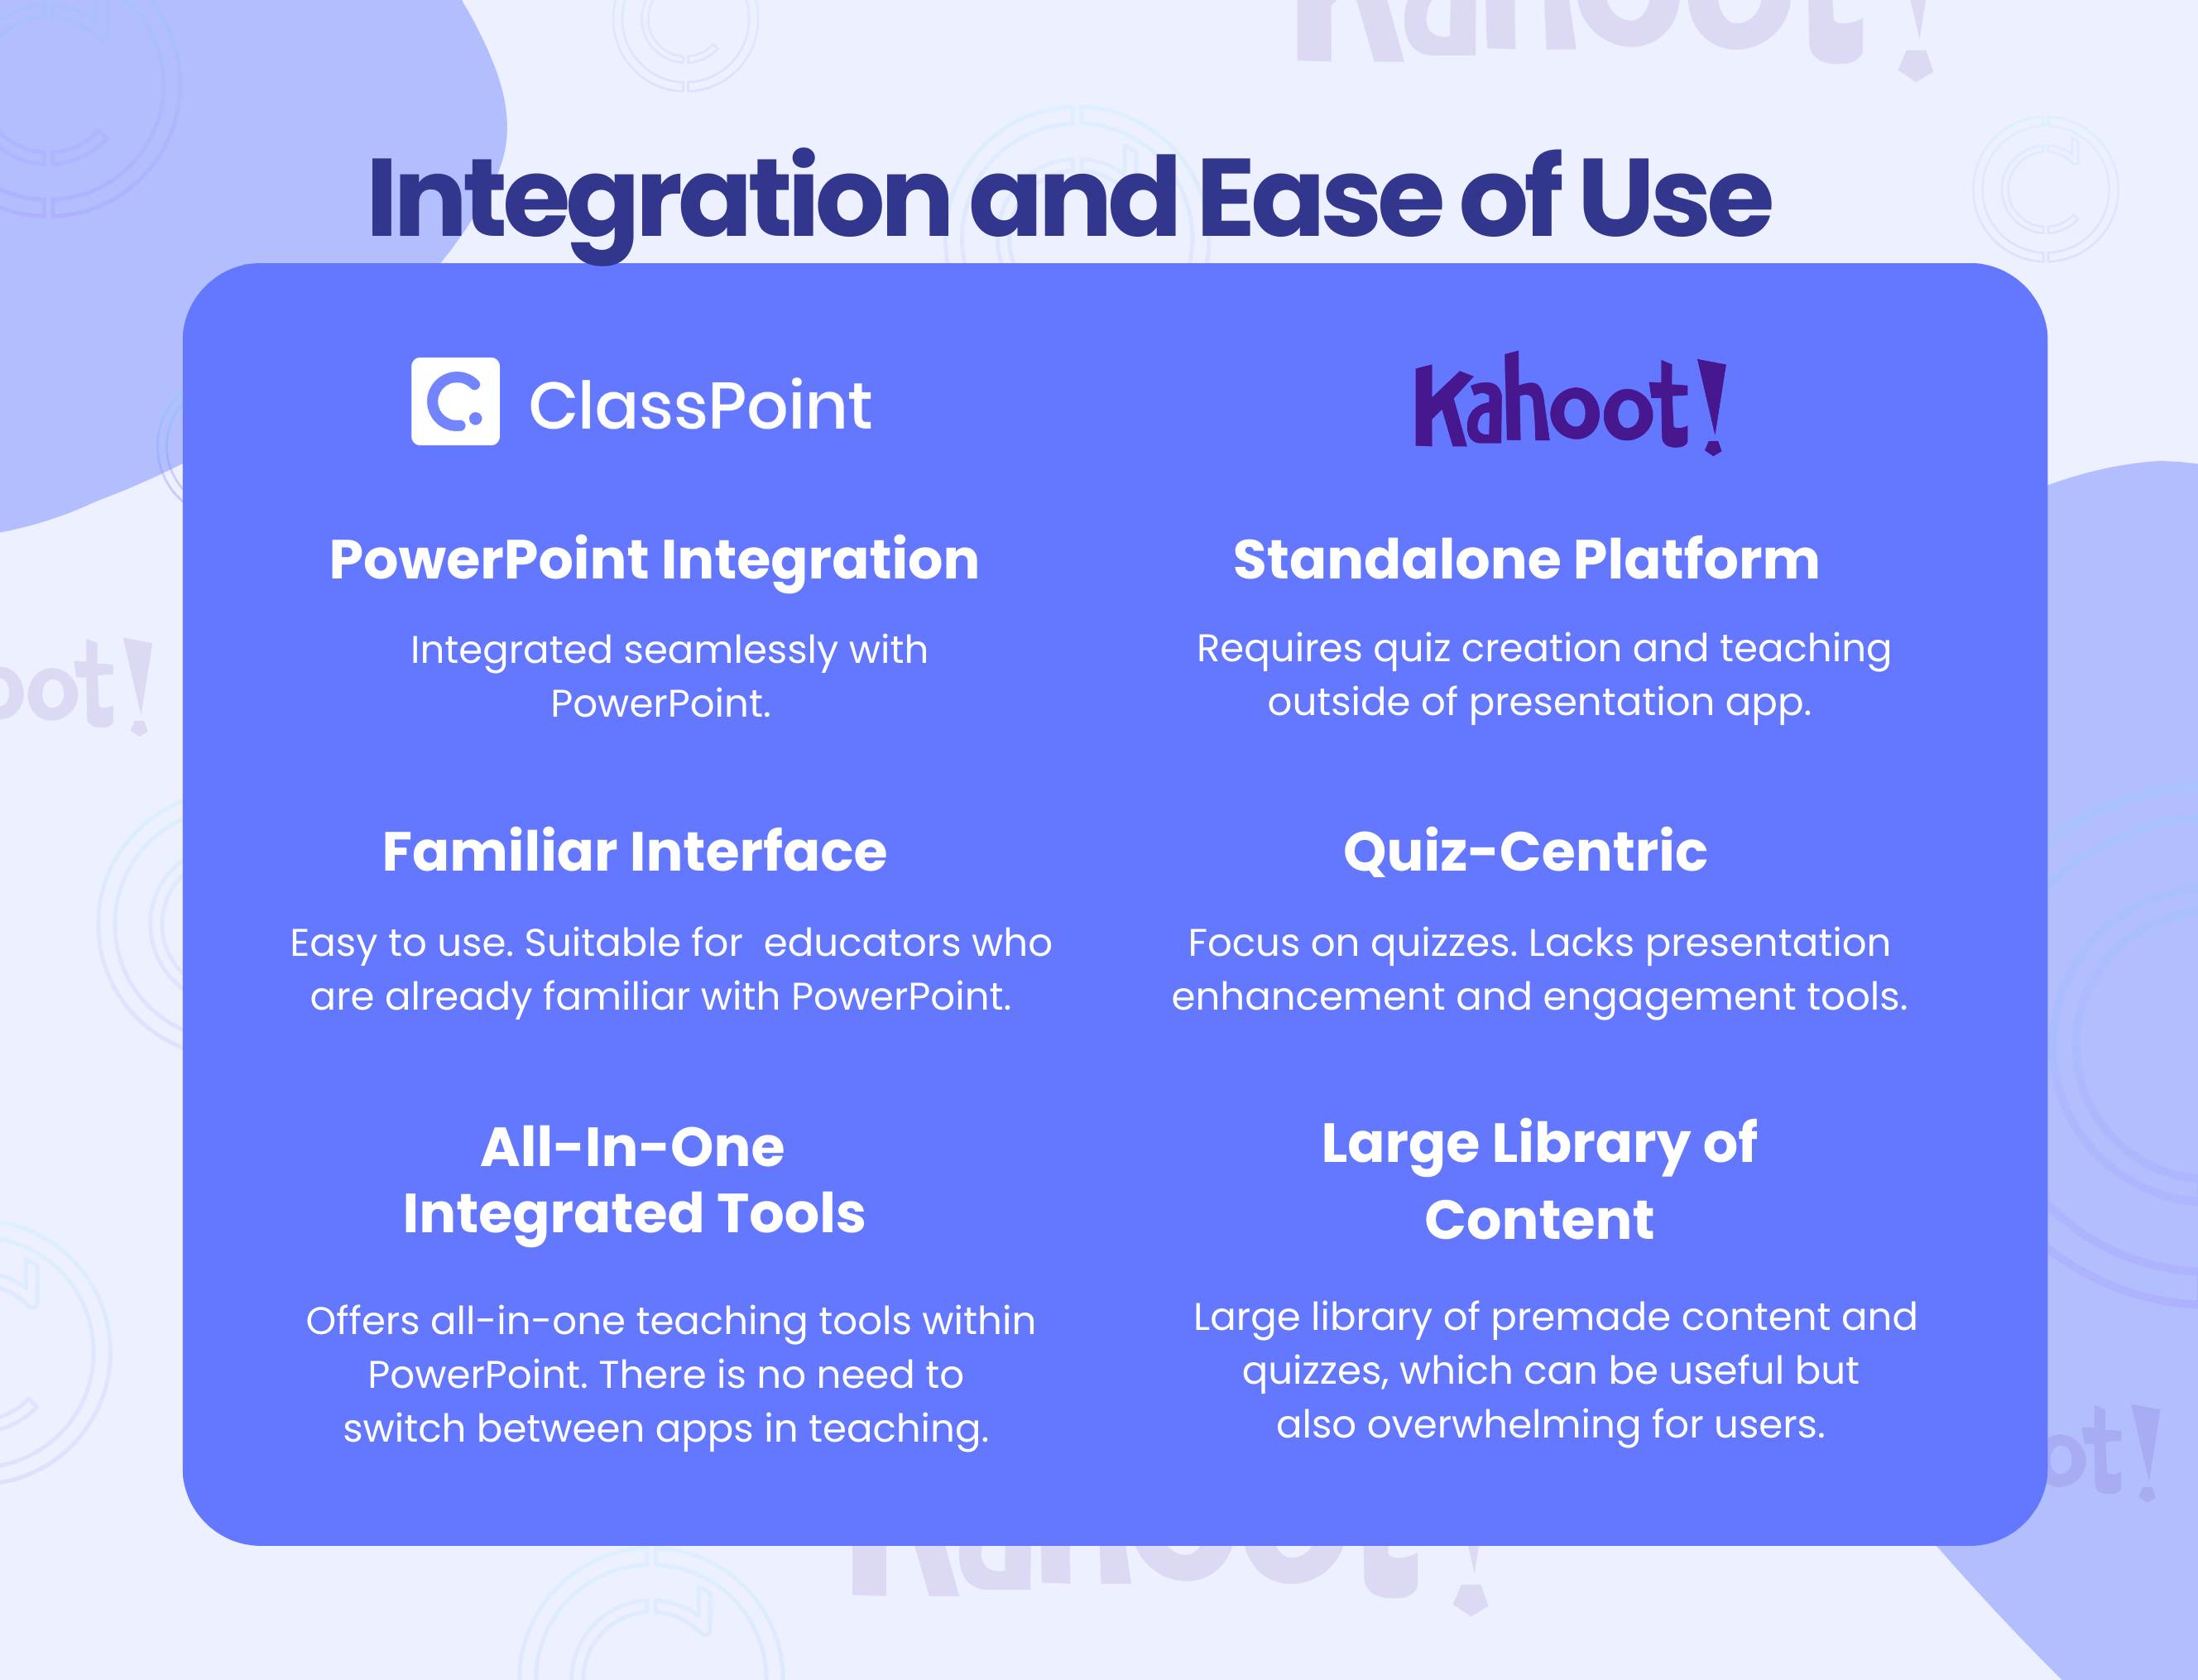 ClassPoint vs Kahoot!: Integration and Ease of Use